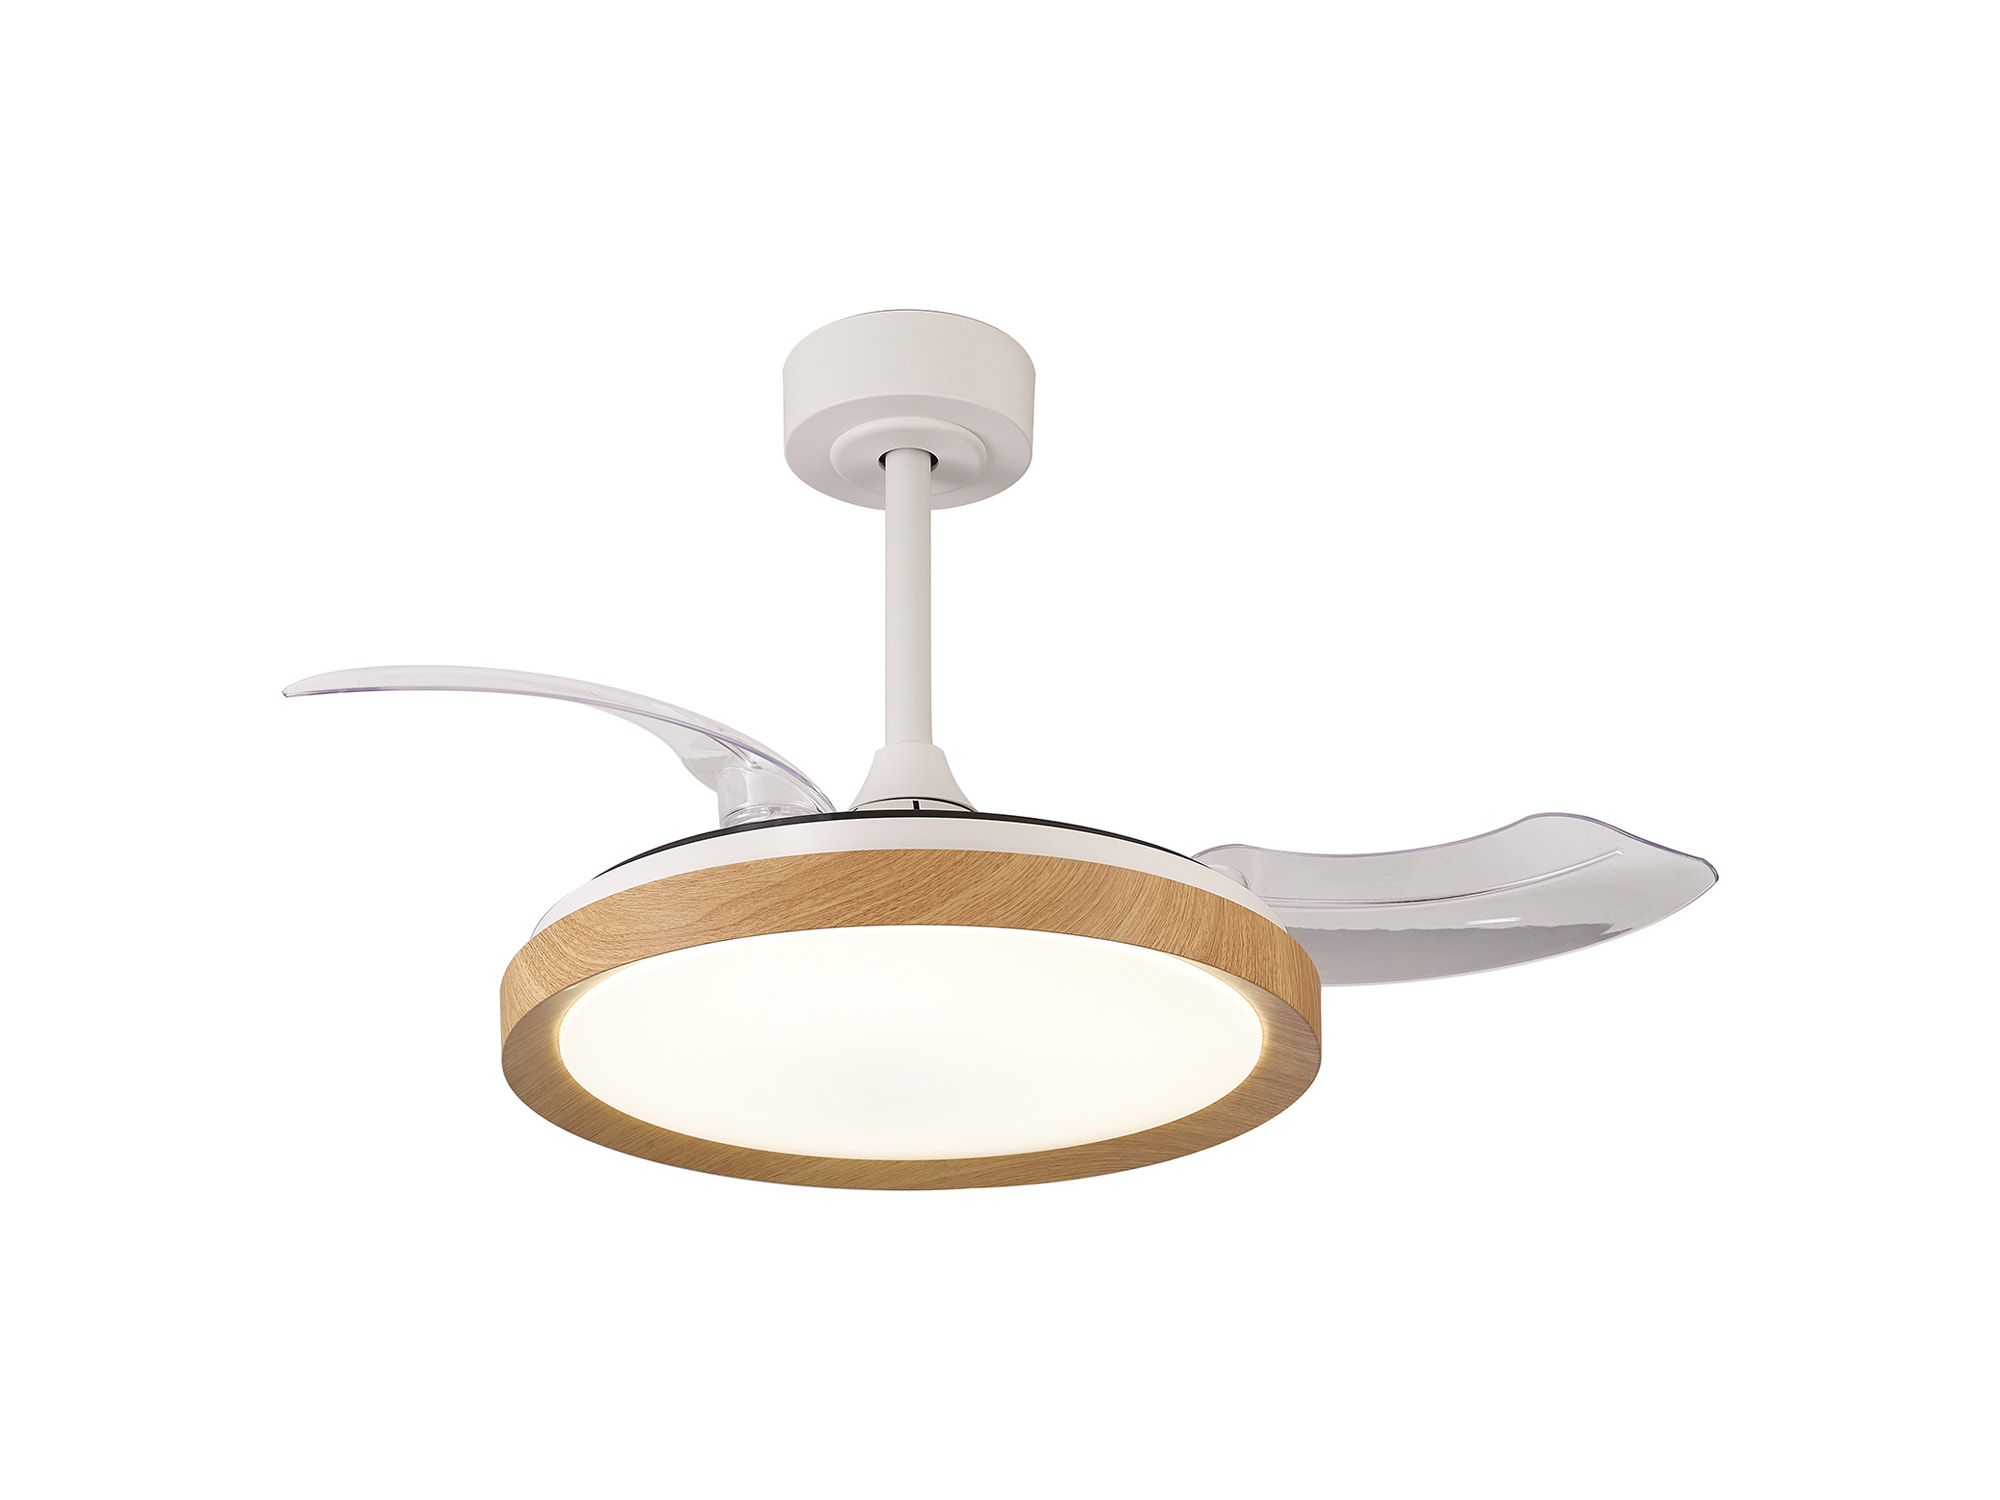 M8830  Mistral Mini 40W LED Dimmable Ceiling Light With Built-In 28W DC Fan, 2700-5000K Remote Control, Wood